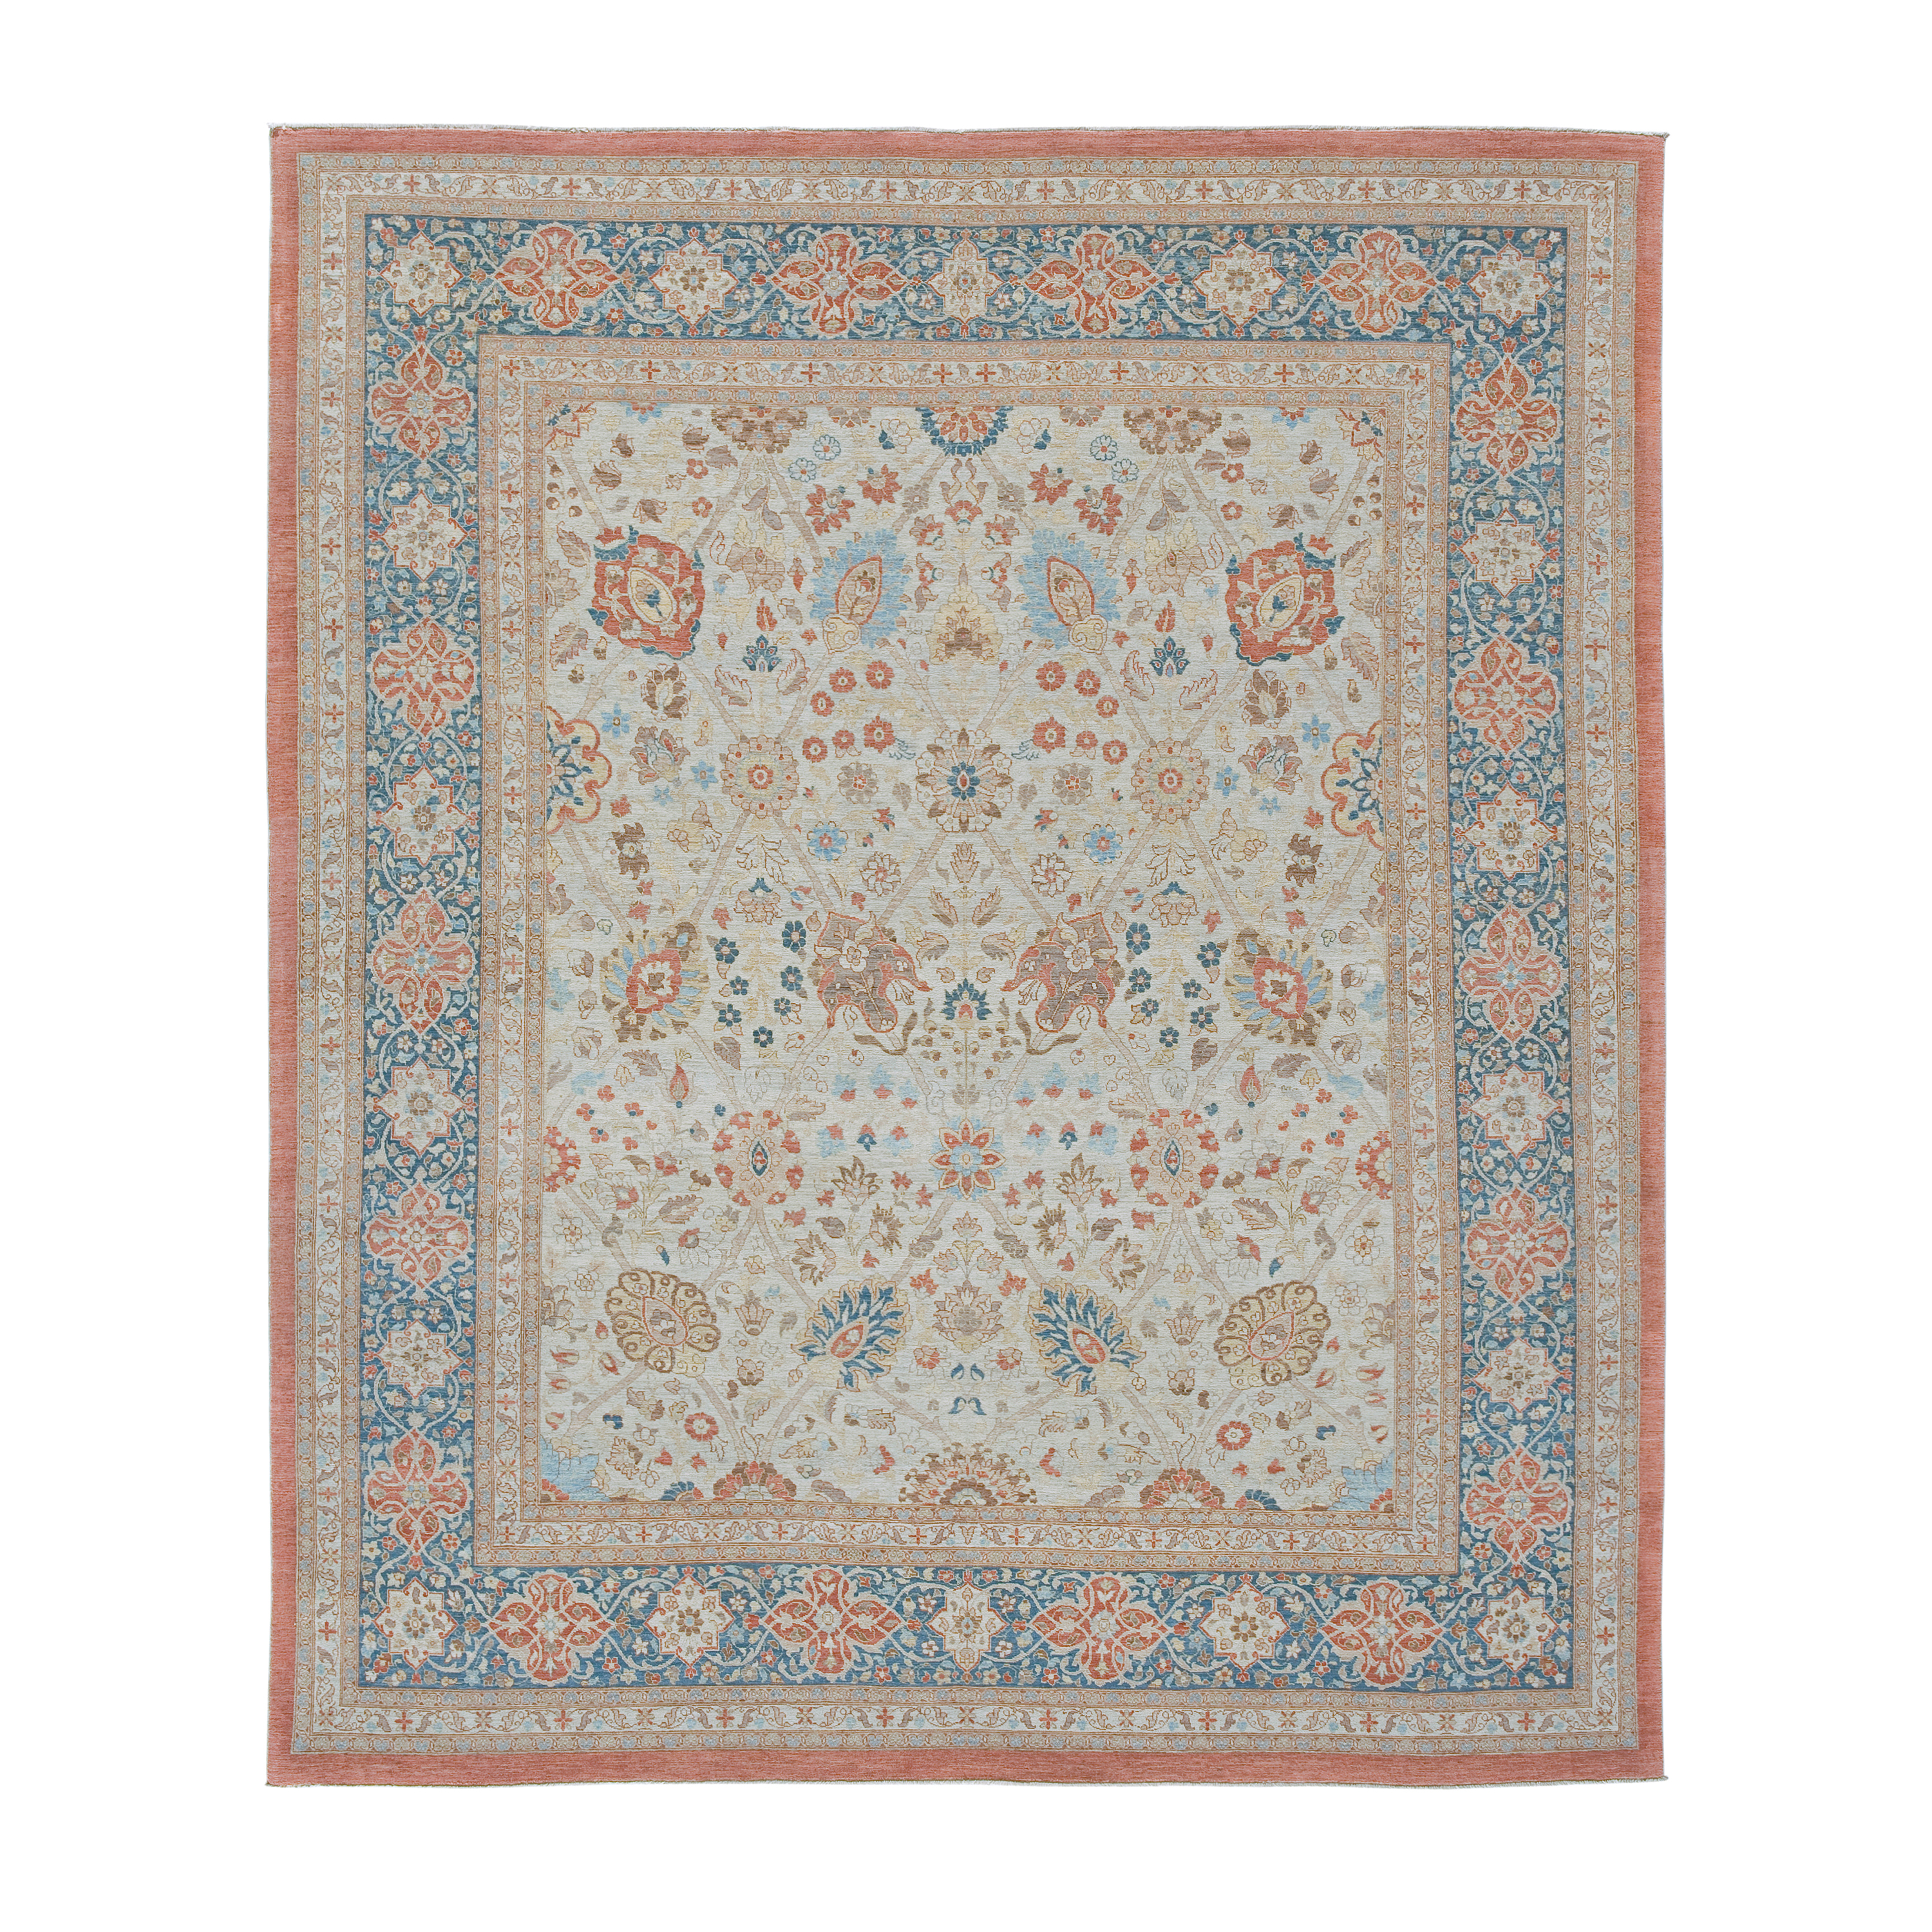 This Persian Tabriz rug is hand-knotted and made fo hand-spun wool.